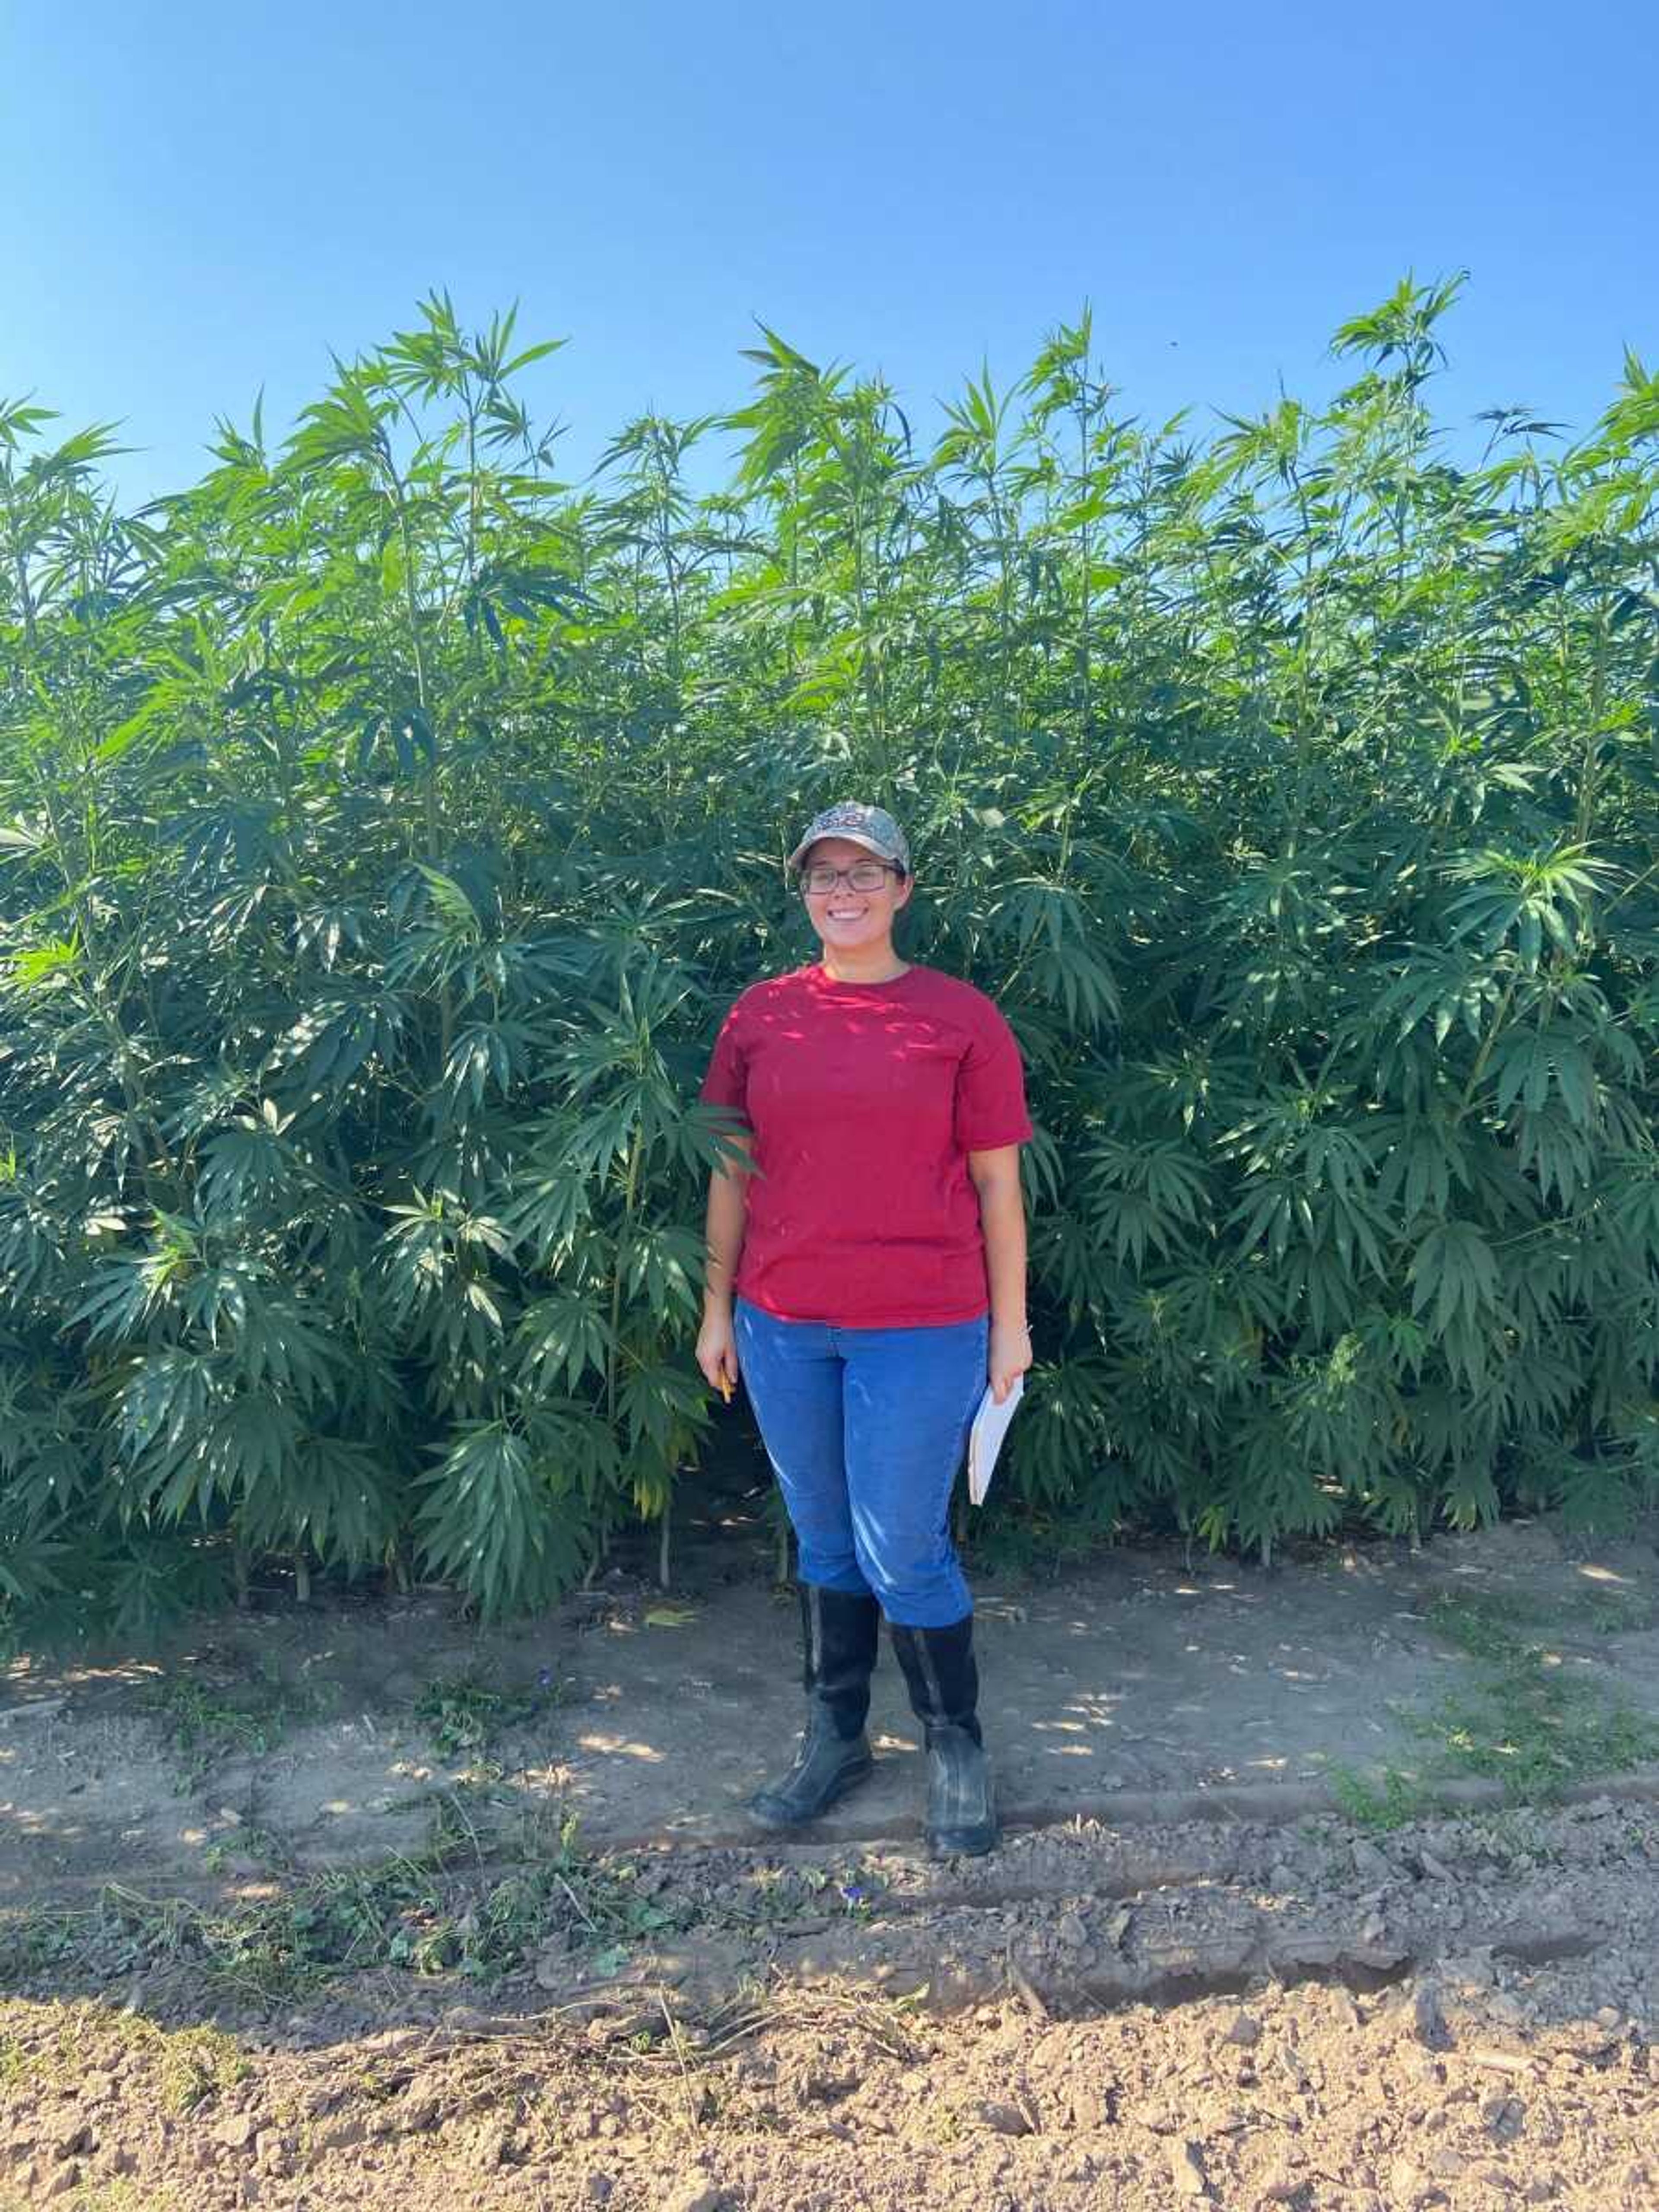 Horticulture and Animal Science senior Rachel Swicionis at the University farm standing with over six feet tall hemp. The Farm is running hemp fiber, grain, and CBD trails to help better understand what climate and soil is best for the plant.